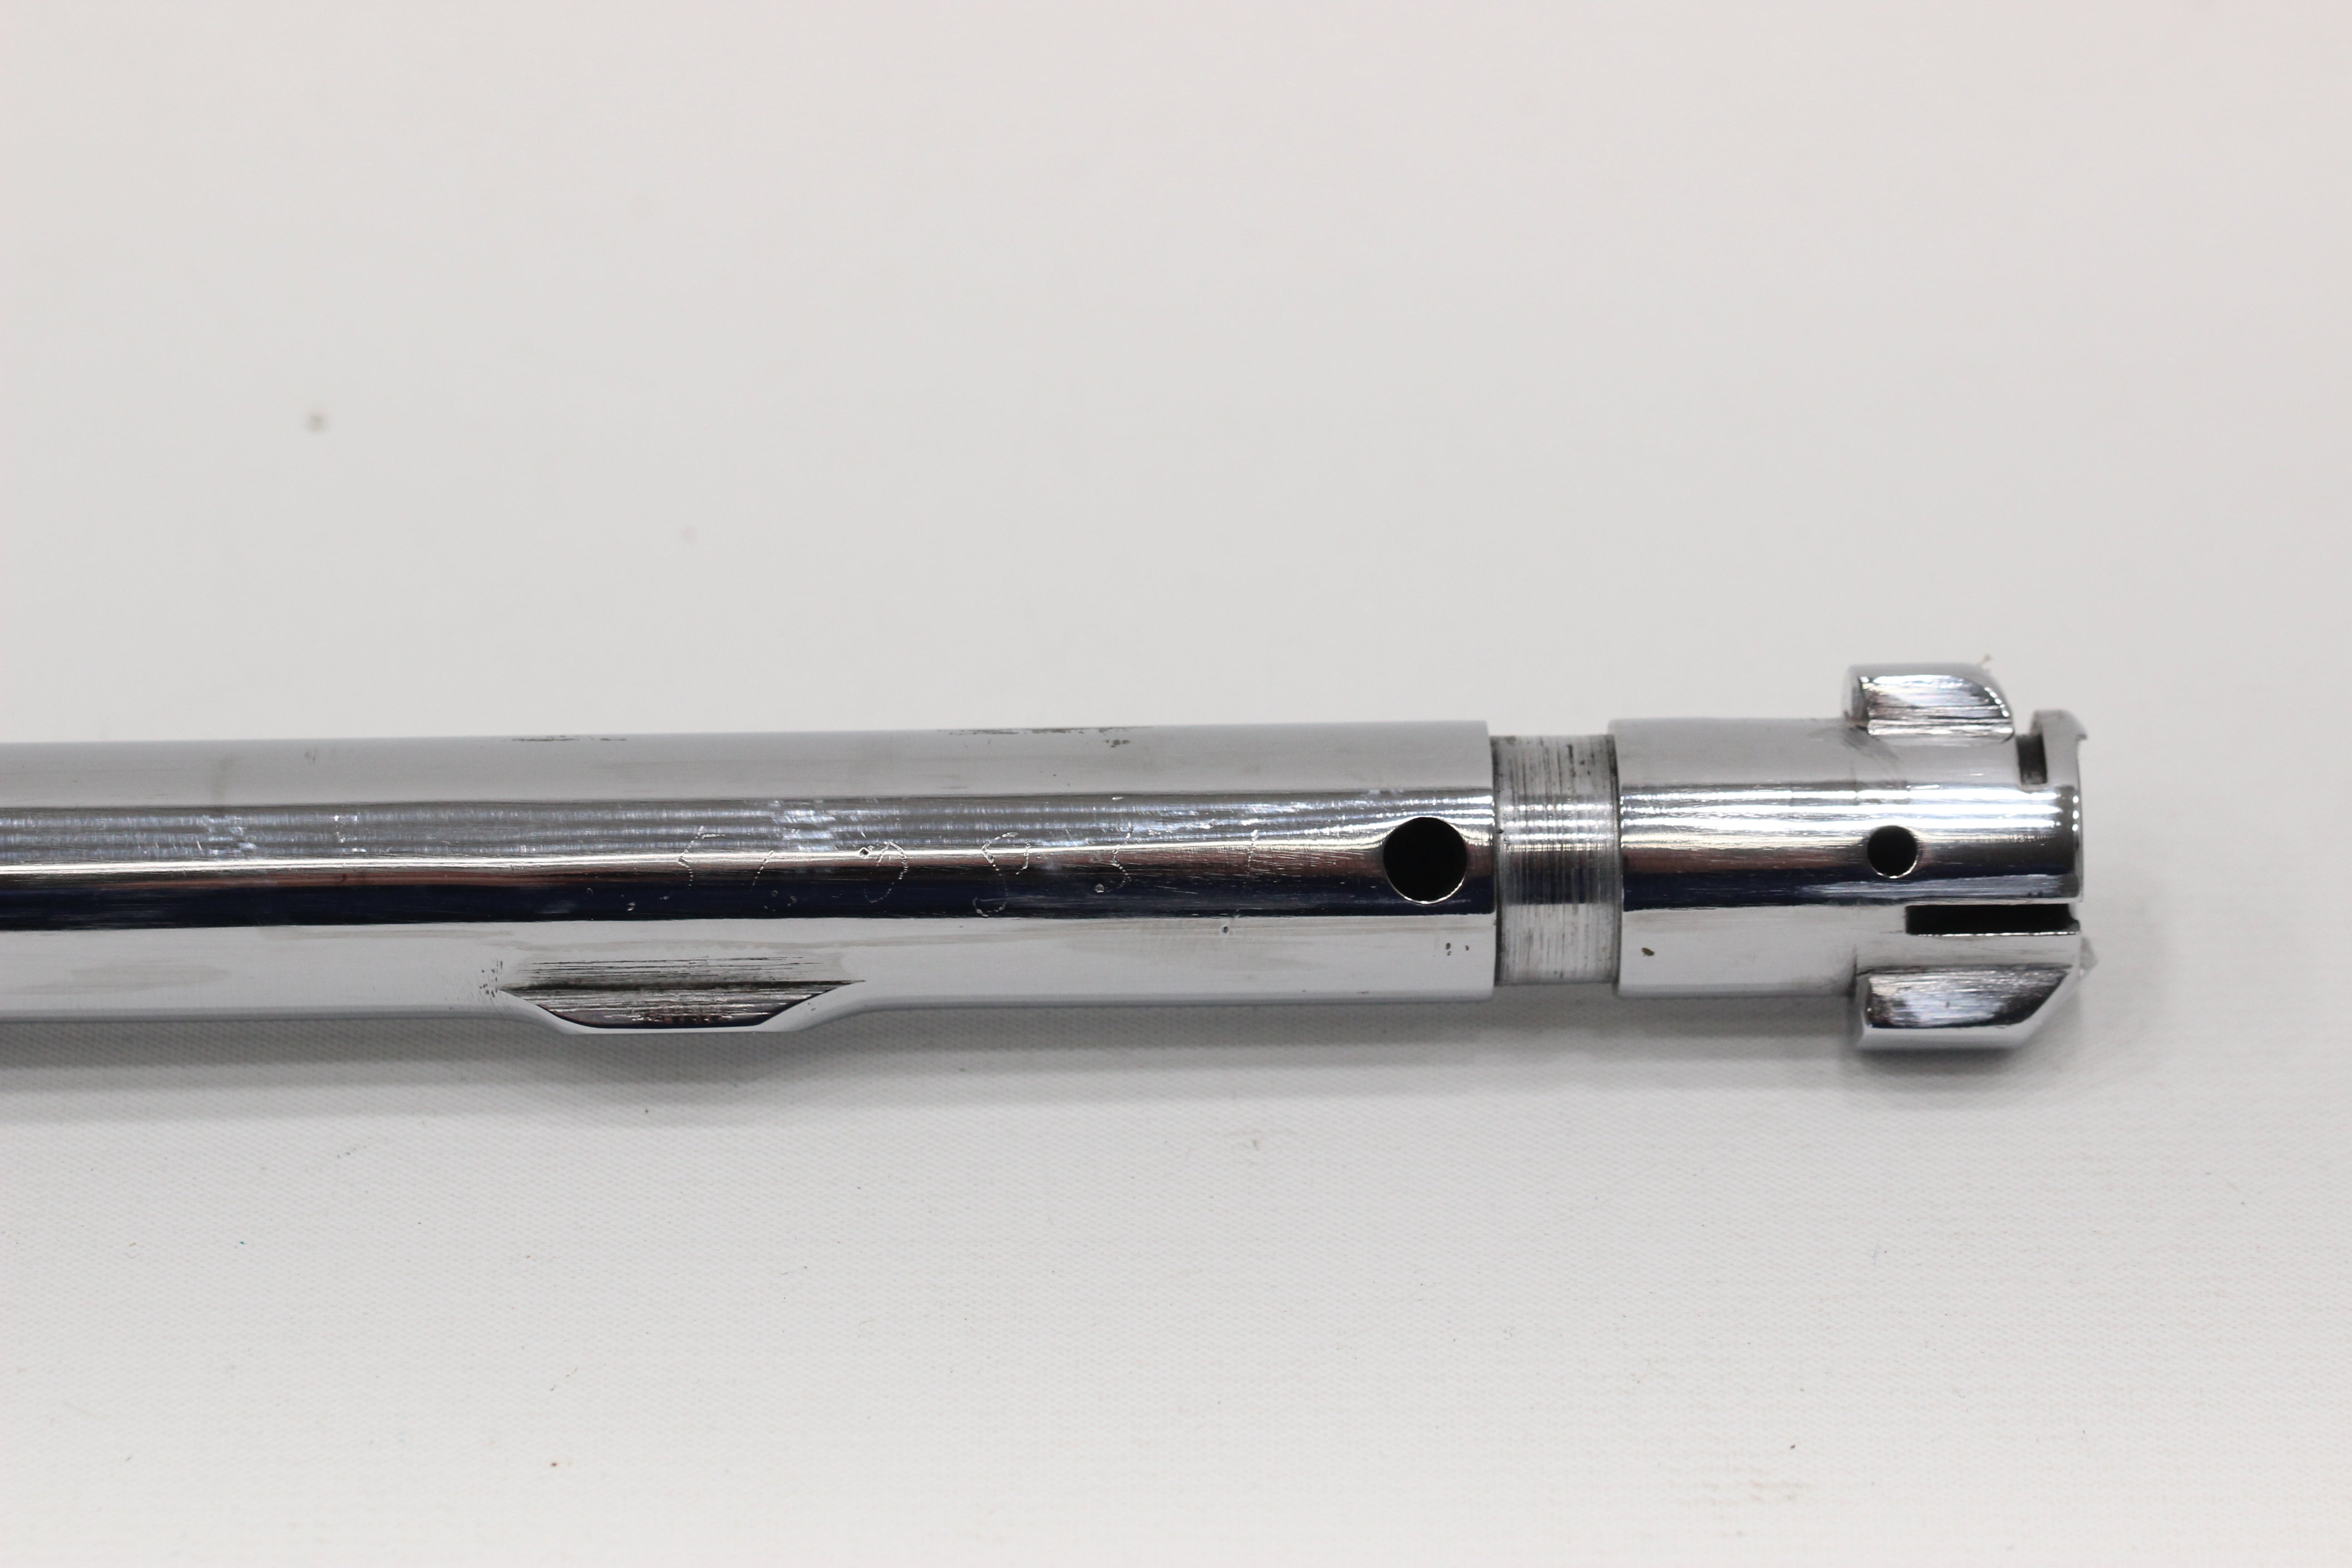 Bolt Housing - Magnum Cartridges - Type-III - Polished Body and Handle